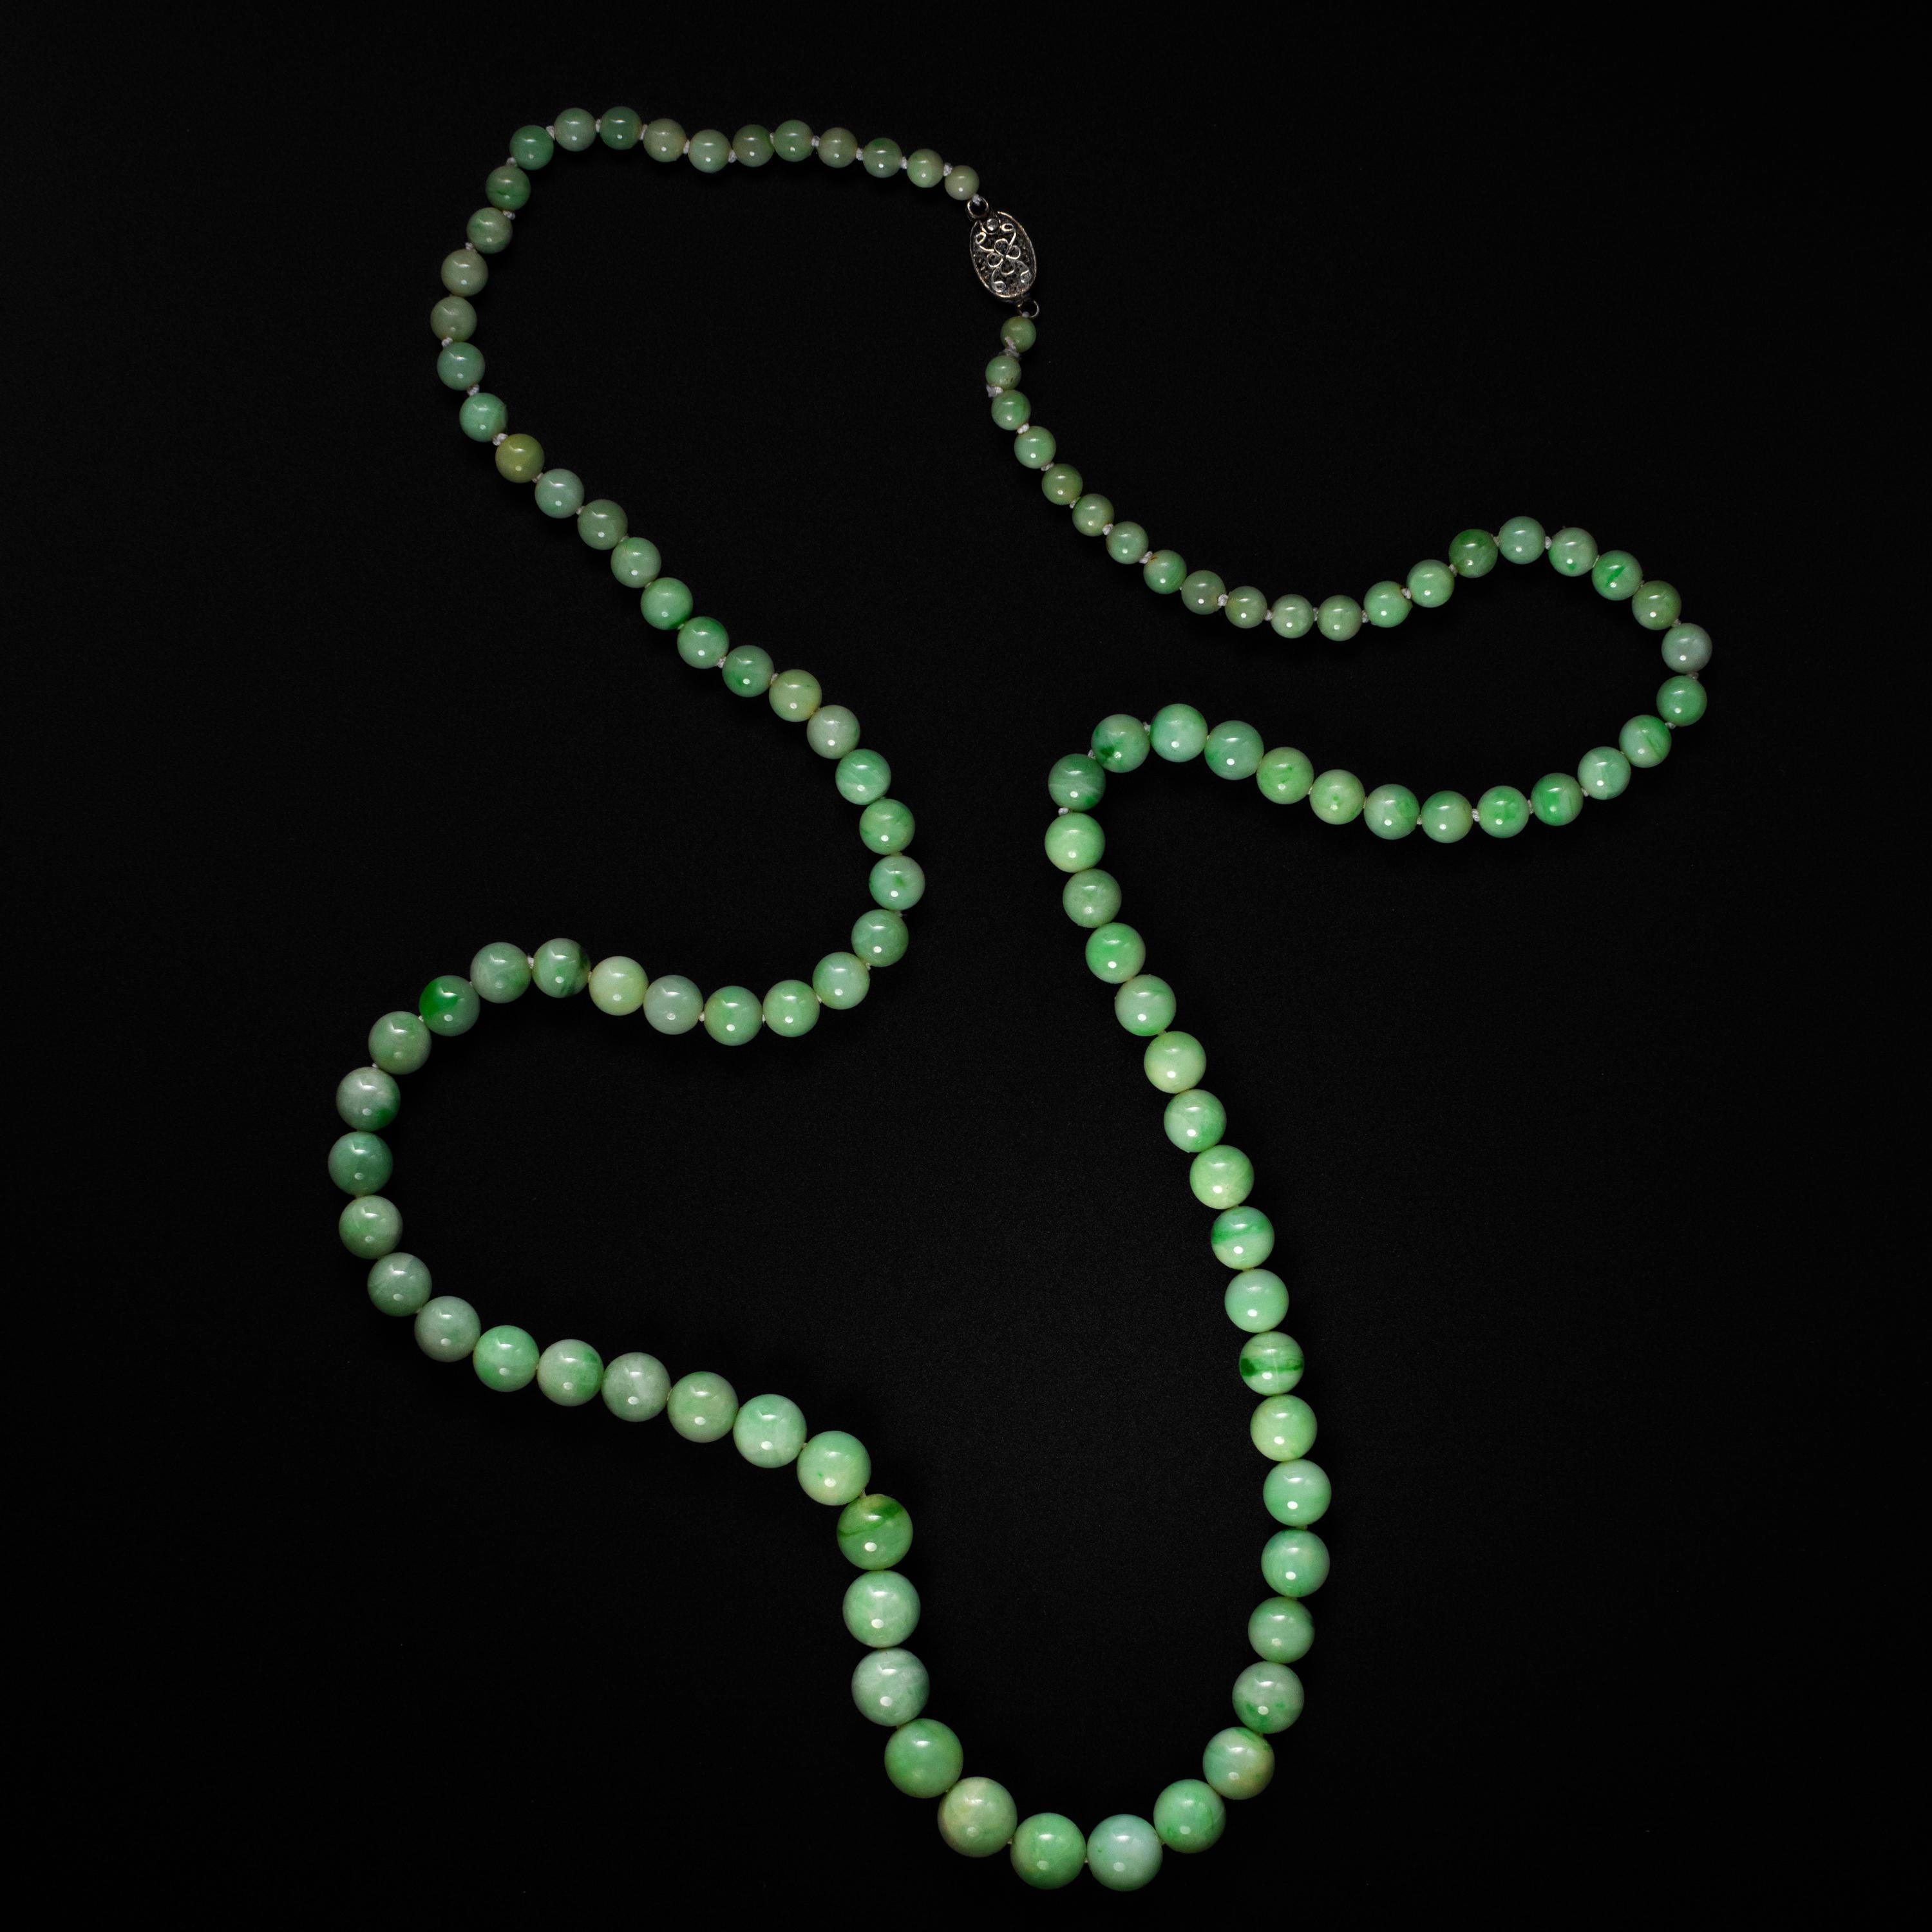 Bright, and filled with light, this radiant Art Deco era (circa 1920s -1930s) necklace is composed of 107 hand-carved and polished natural and untreated Burmese jadeite jade beads. The beads range in size from 4.13mm to 9.38.

Overall, the beads are